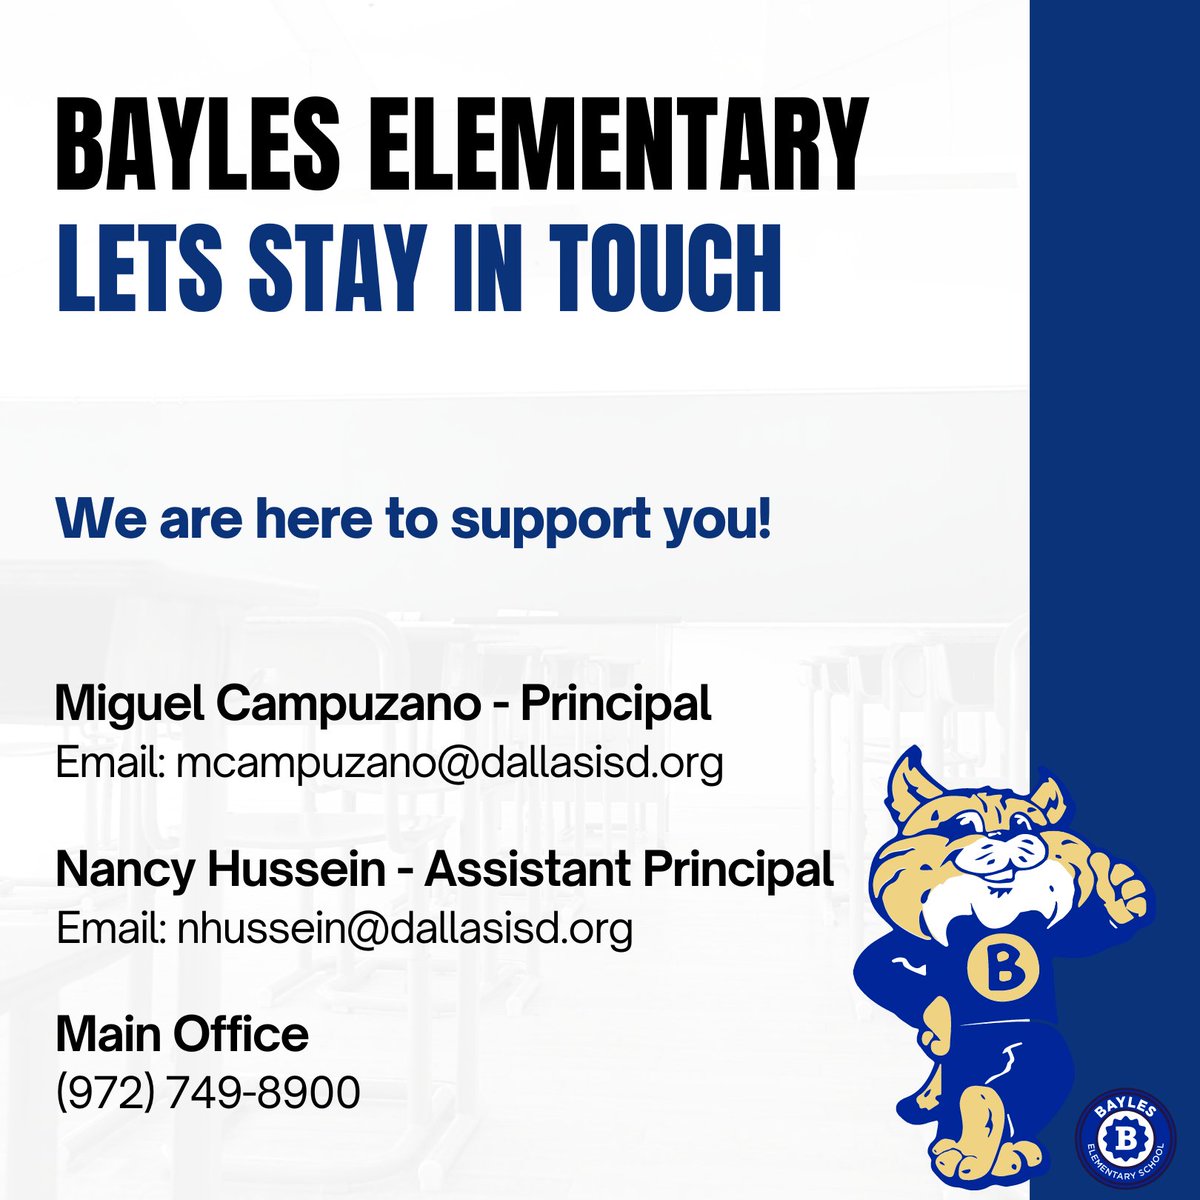 Connecting Bayles Families: Let's Stay in Touch! We're here to assist! #BaylesBobcats #BaylesES #BaylesFam #DallasISD #DISD #Region2